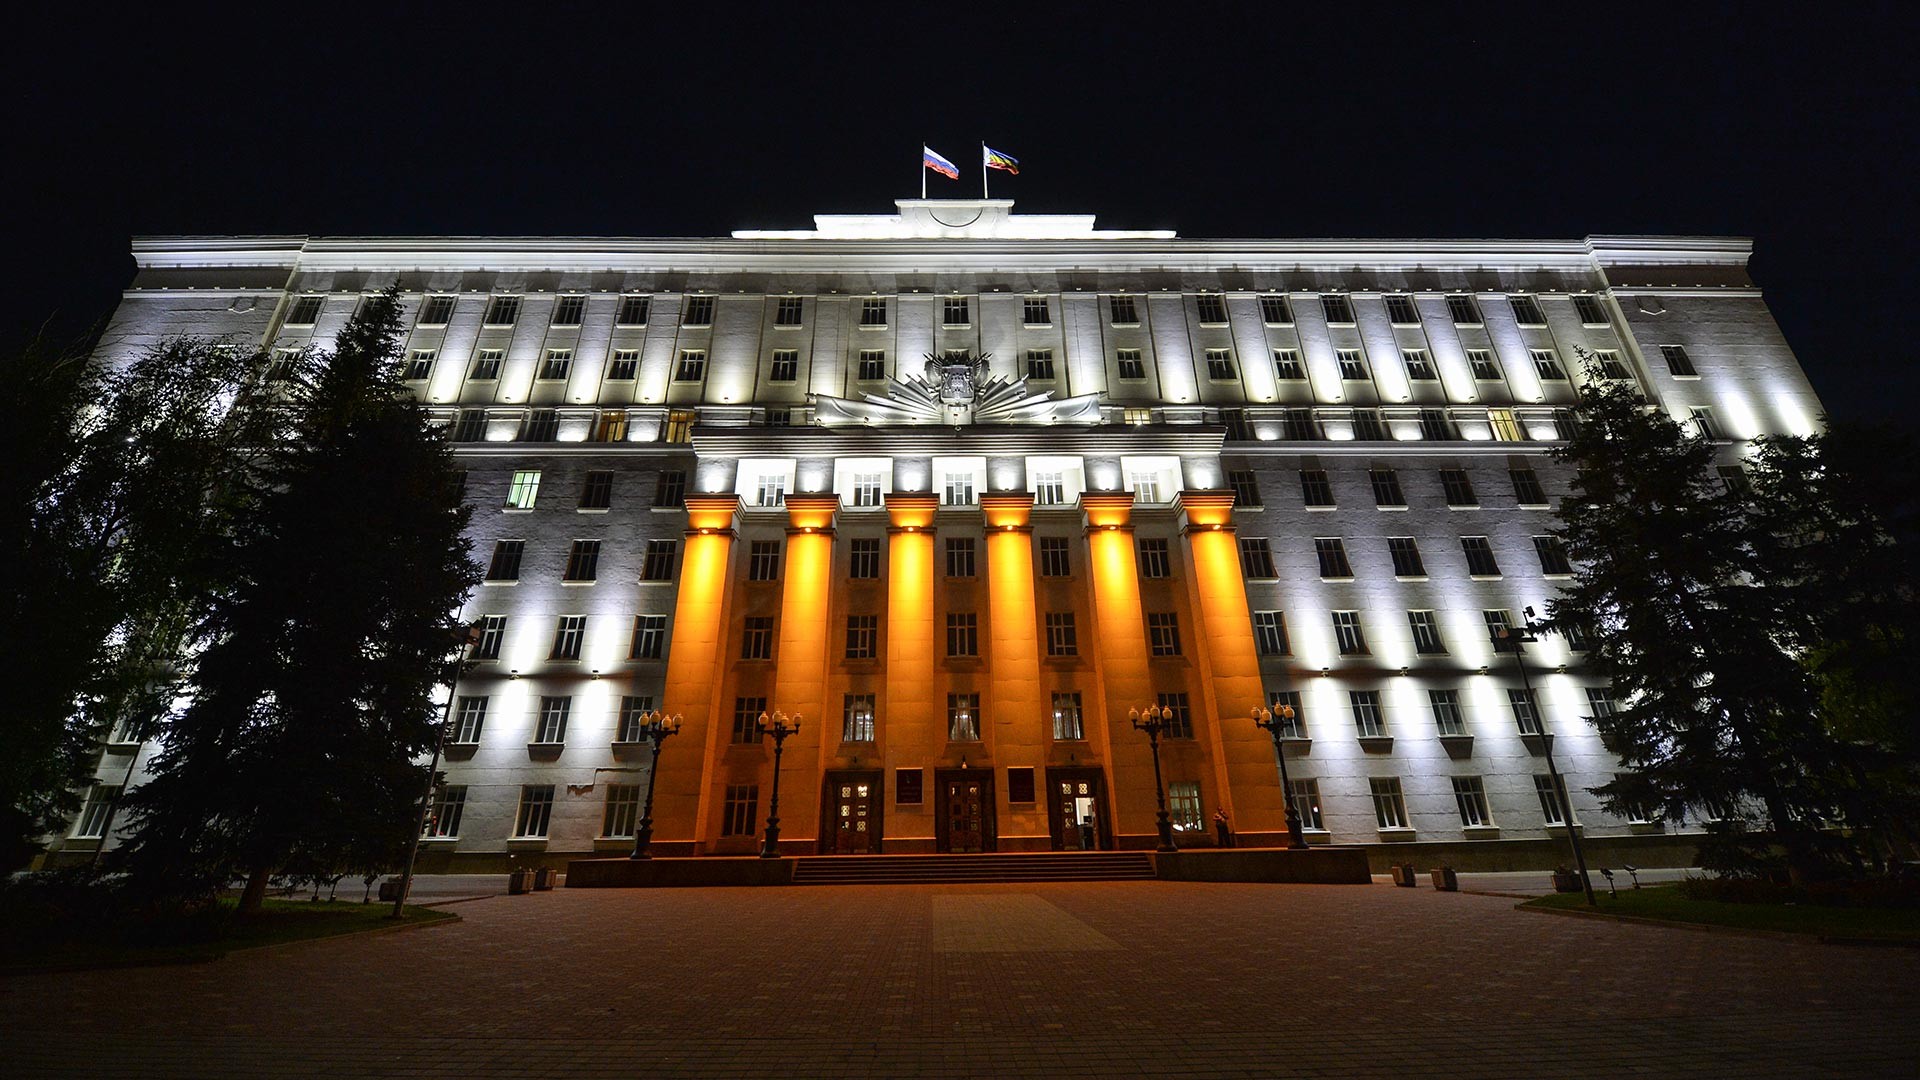 The building of the regional administration of Rostov-on-Don.